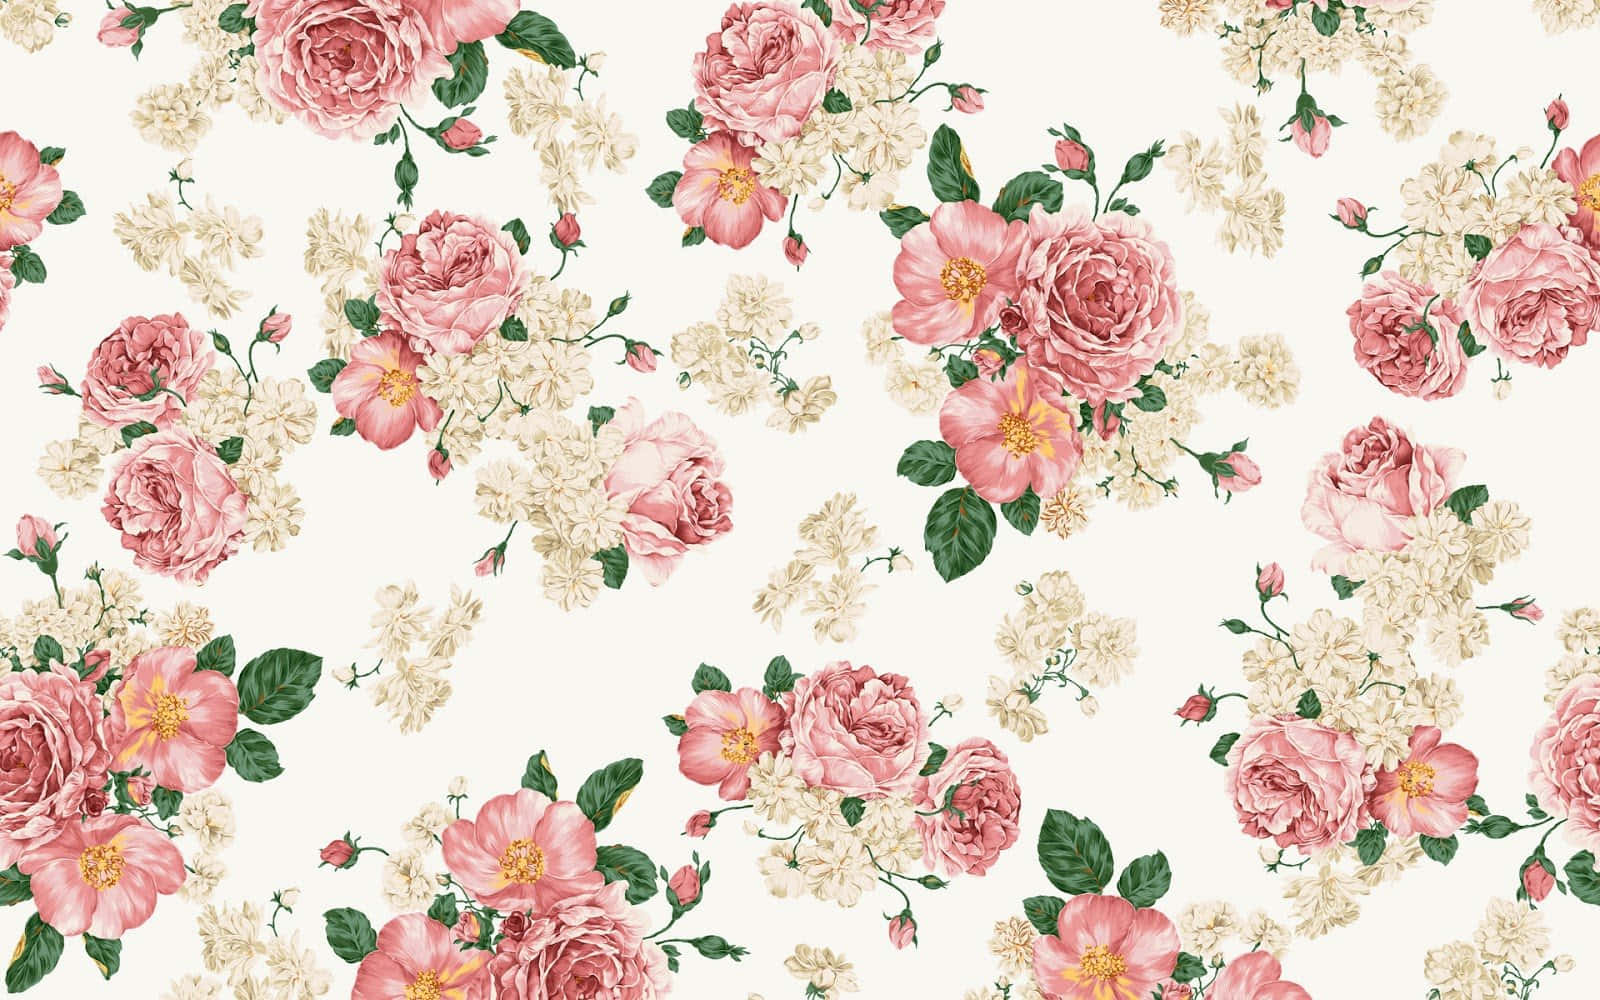 A Delightfully Vintage Floral Background to Brighten Your Day